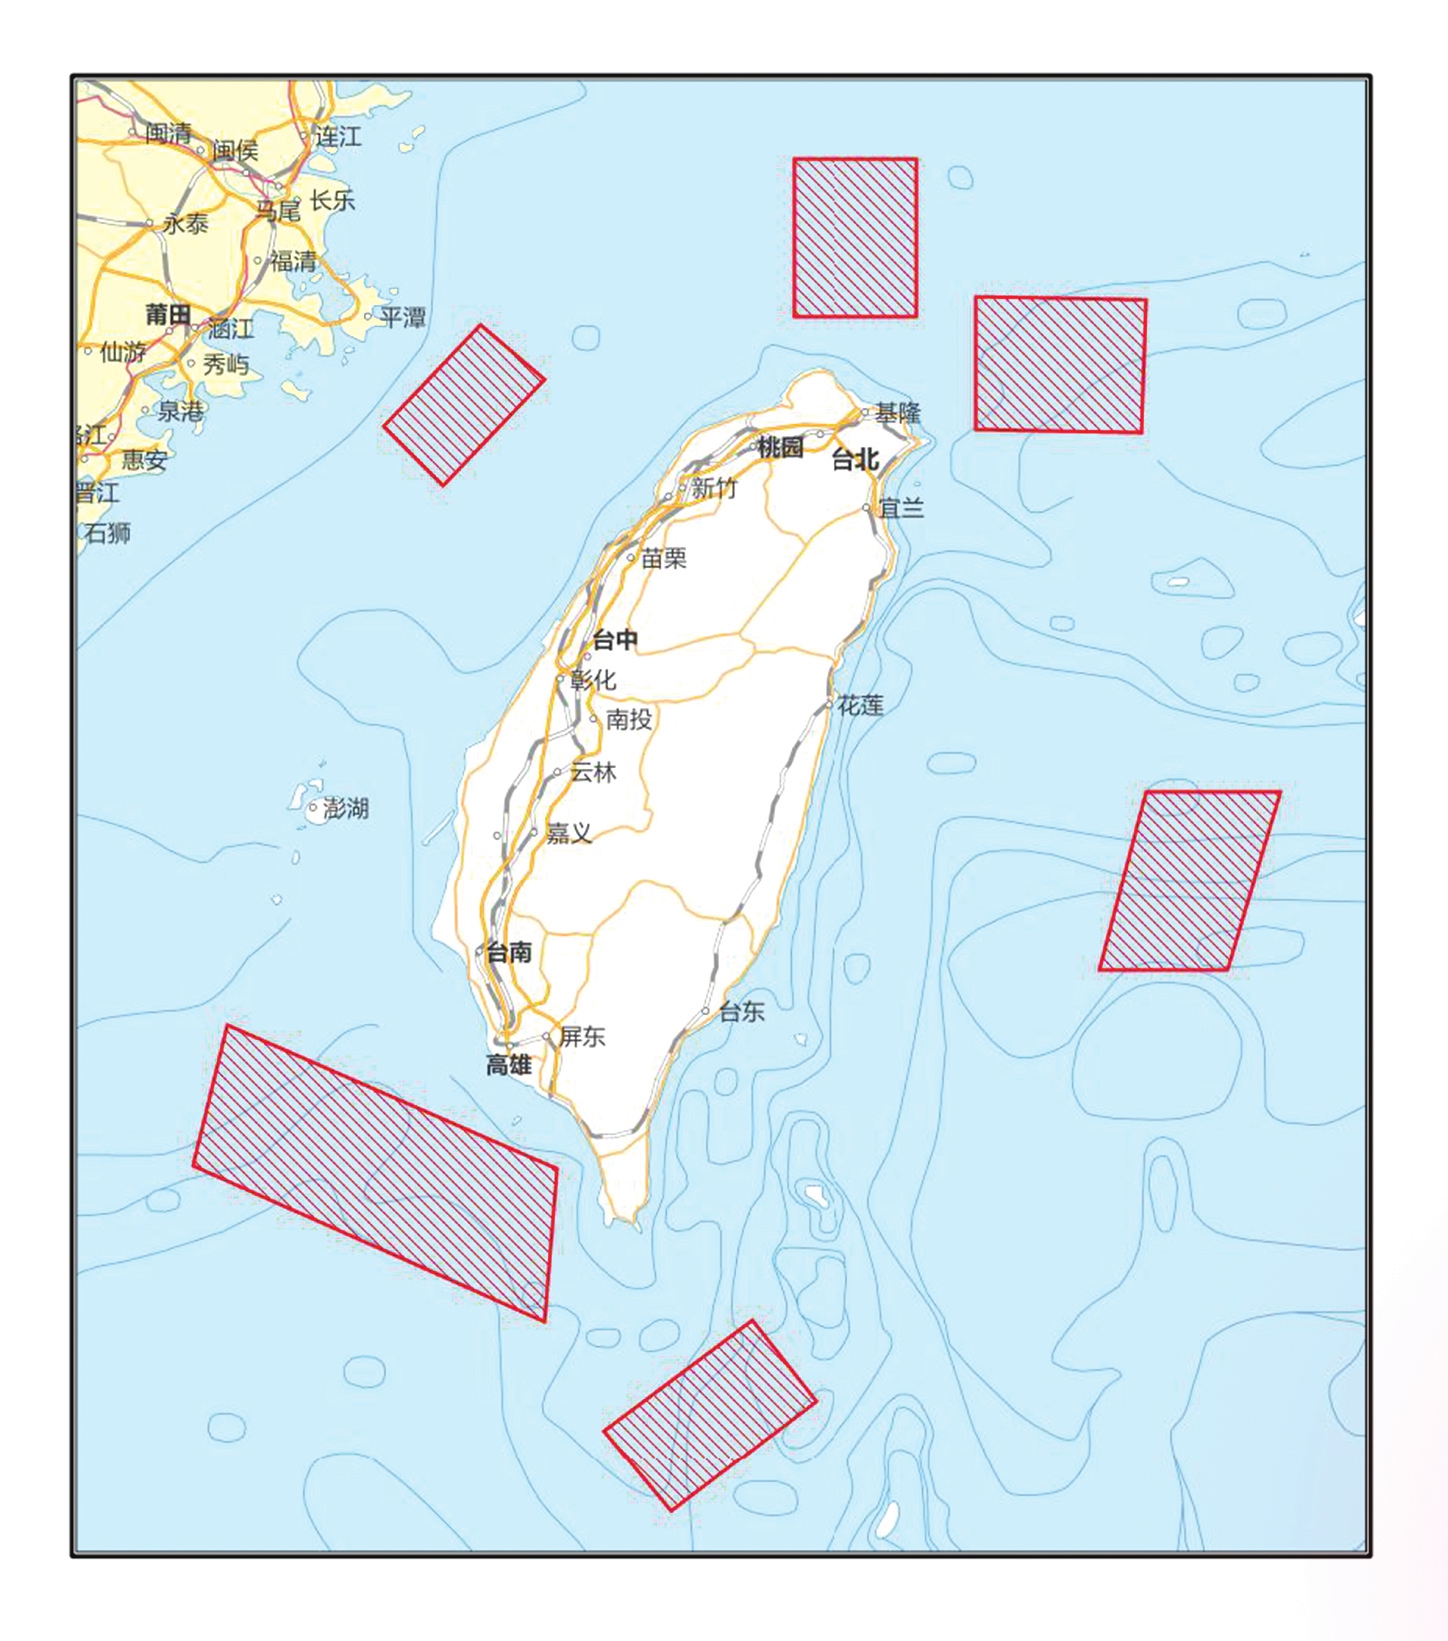 A sketch map released on August 2, 2022 shows the six regions where the People's Liberation Army will conduct important military exercises and training activities including live-fire drills surrounding the Taiwan island from August 4 to 7, 2022. /Xinhua